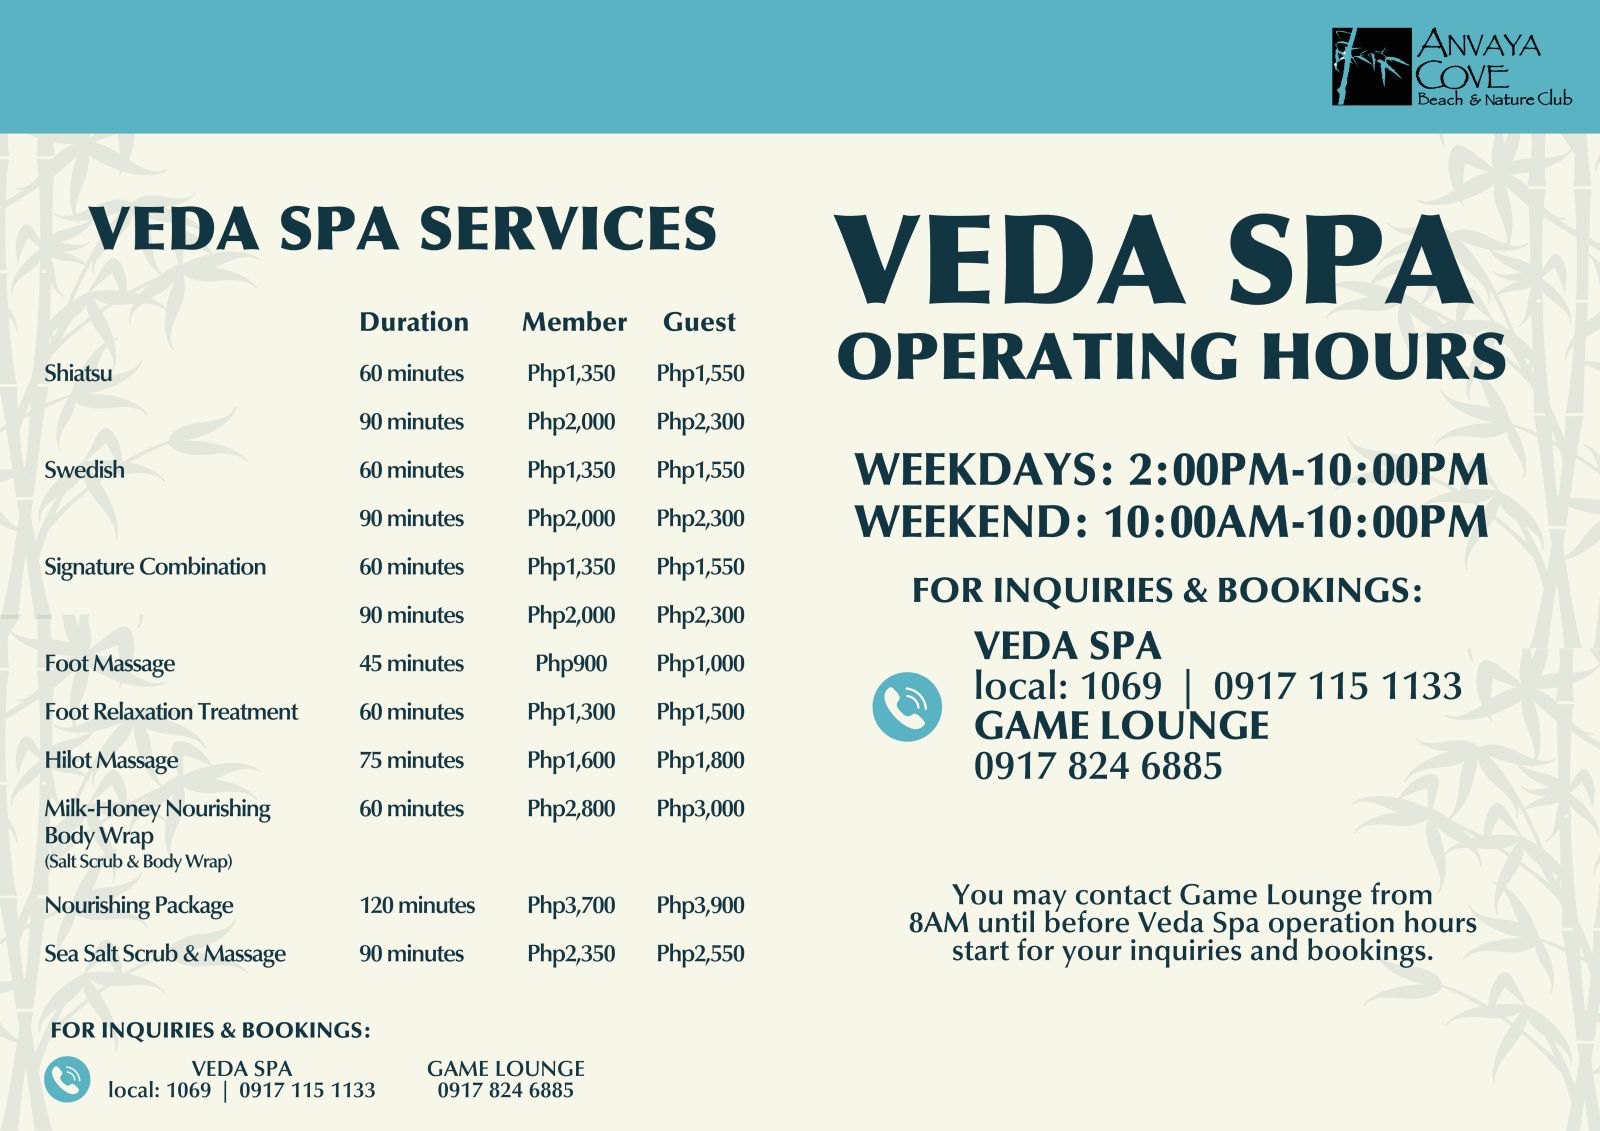 Veda Spa Services and Rates